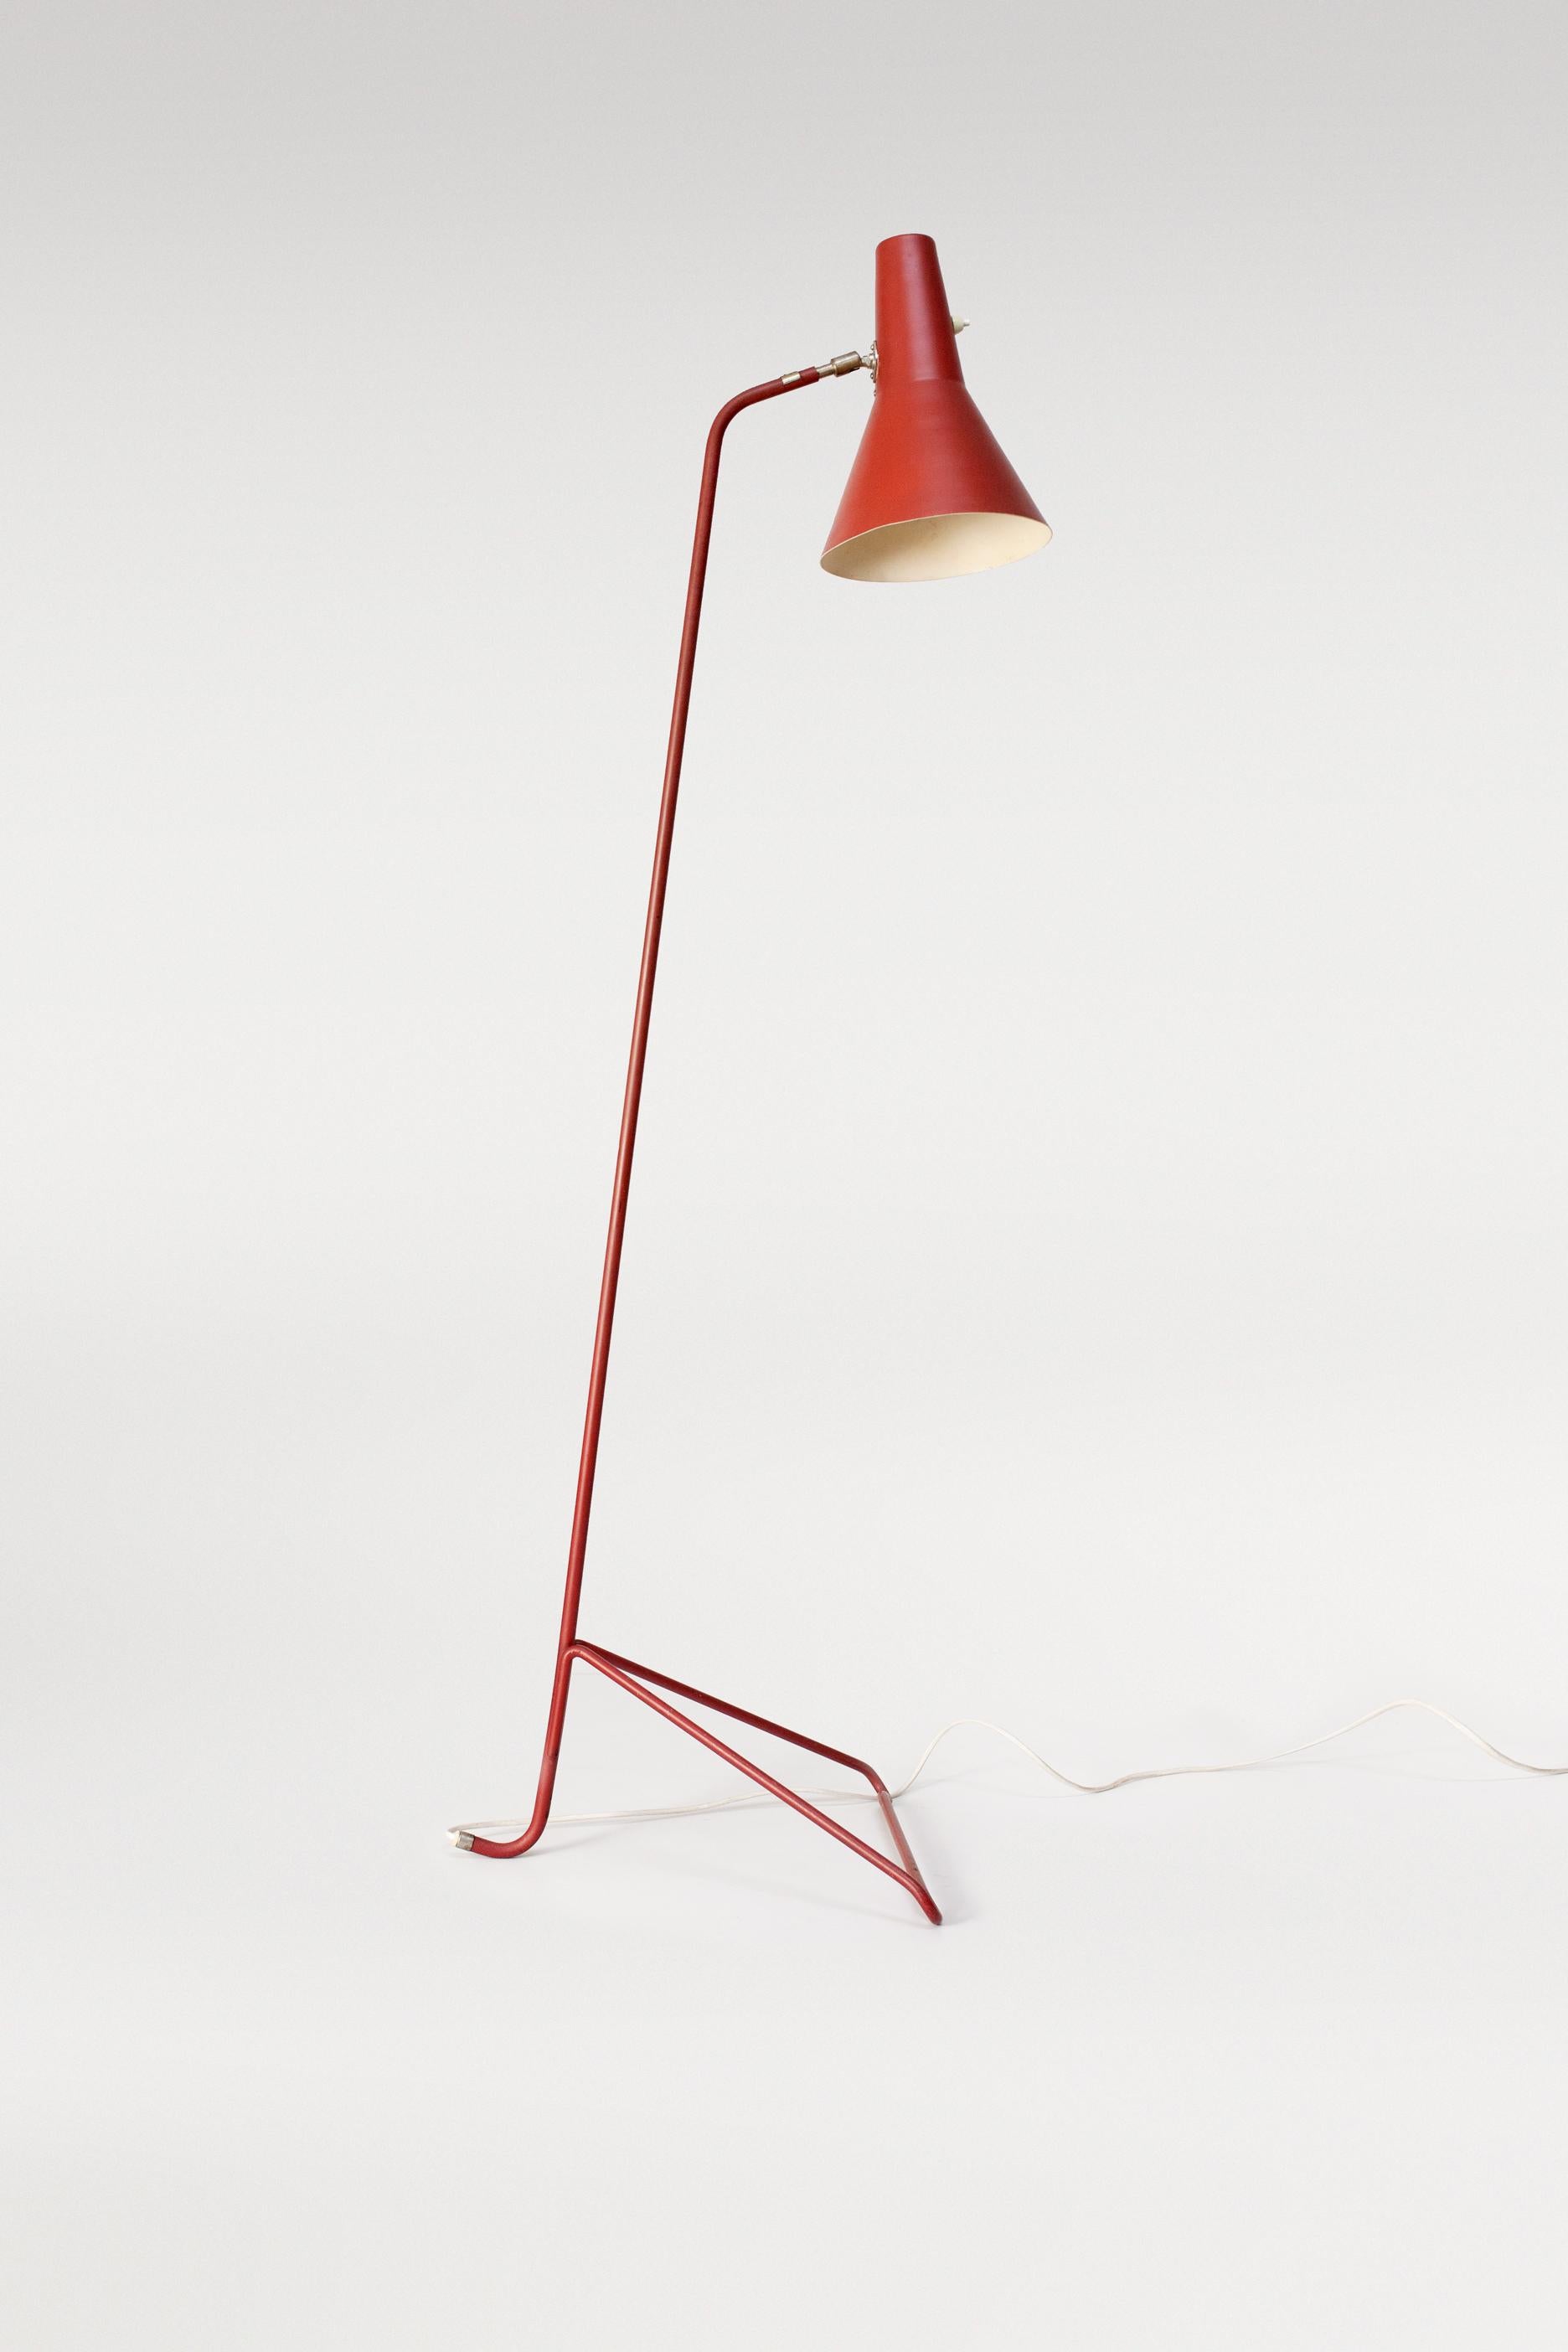 A Circa 1950’s floor lamp by Hans Bergström för ASEA. Red metal foot with spun aluminum lamp shade connected through a nickel plated brass pin-joint for adjustable beam angle. E27 socket holds one light bulb. Original wiring. Original light switch